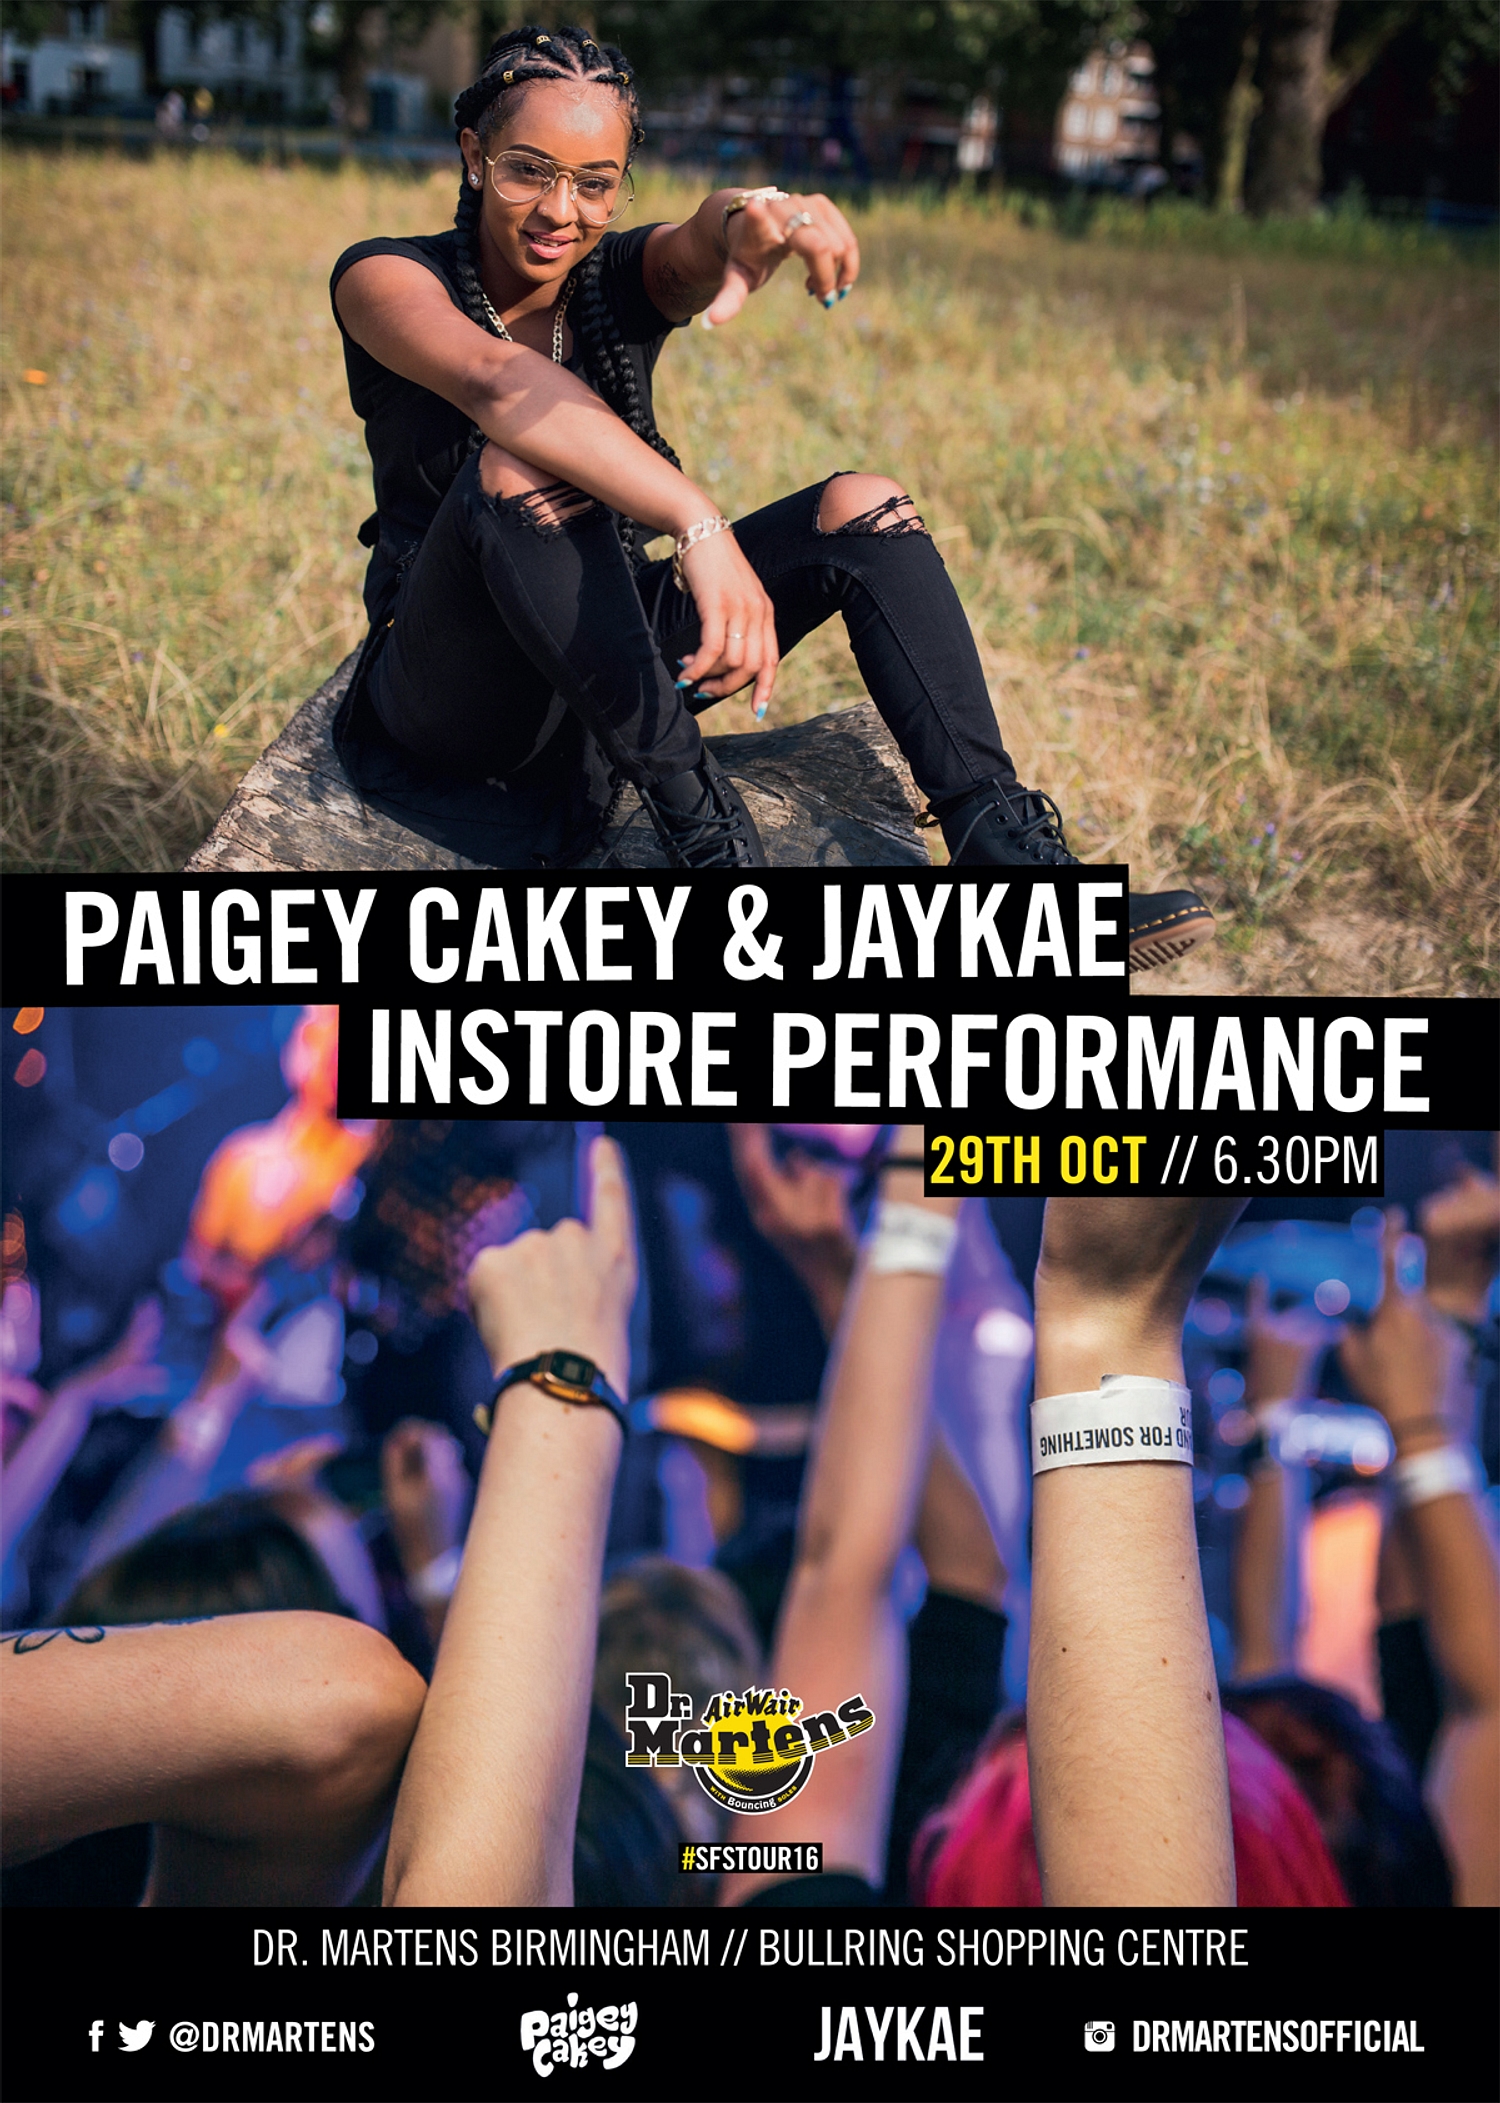 Win tickets to see Paigey Cakey play the Stand For Something Tour